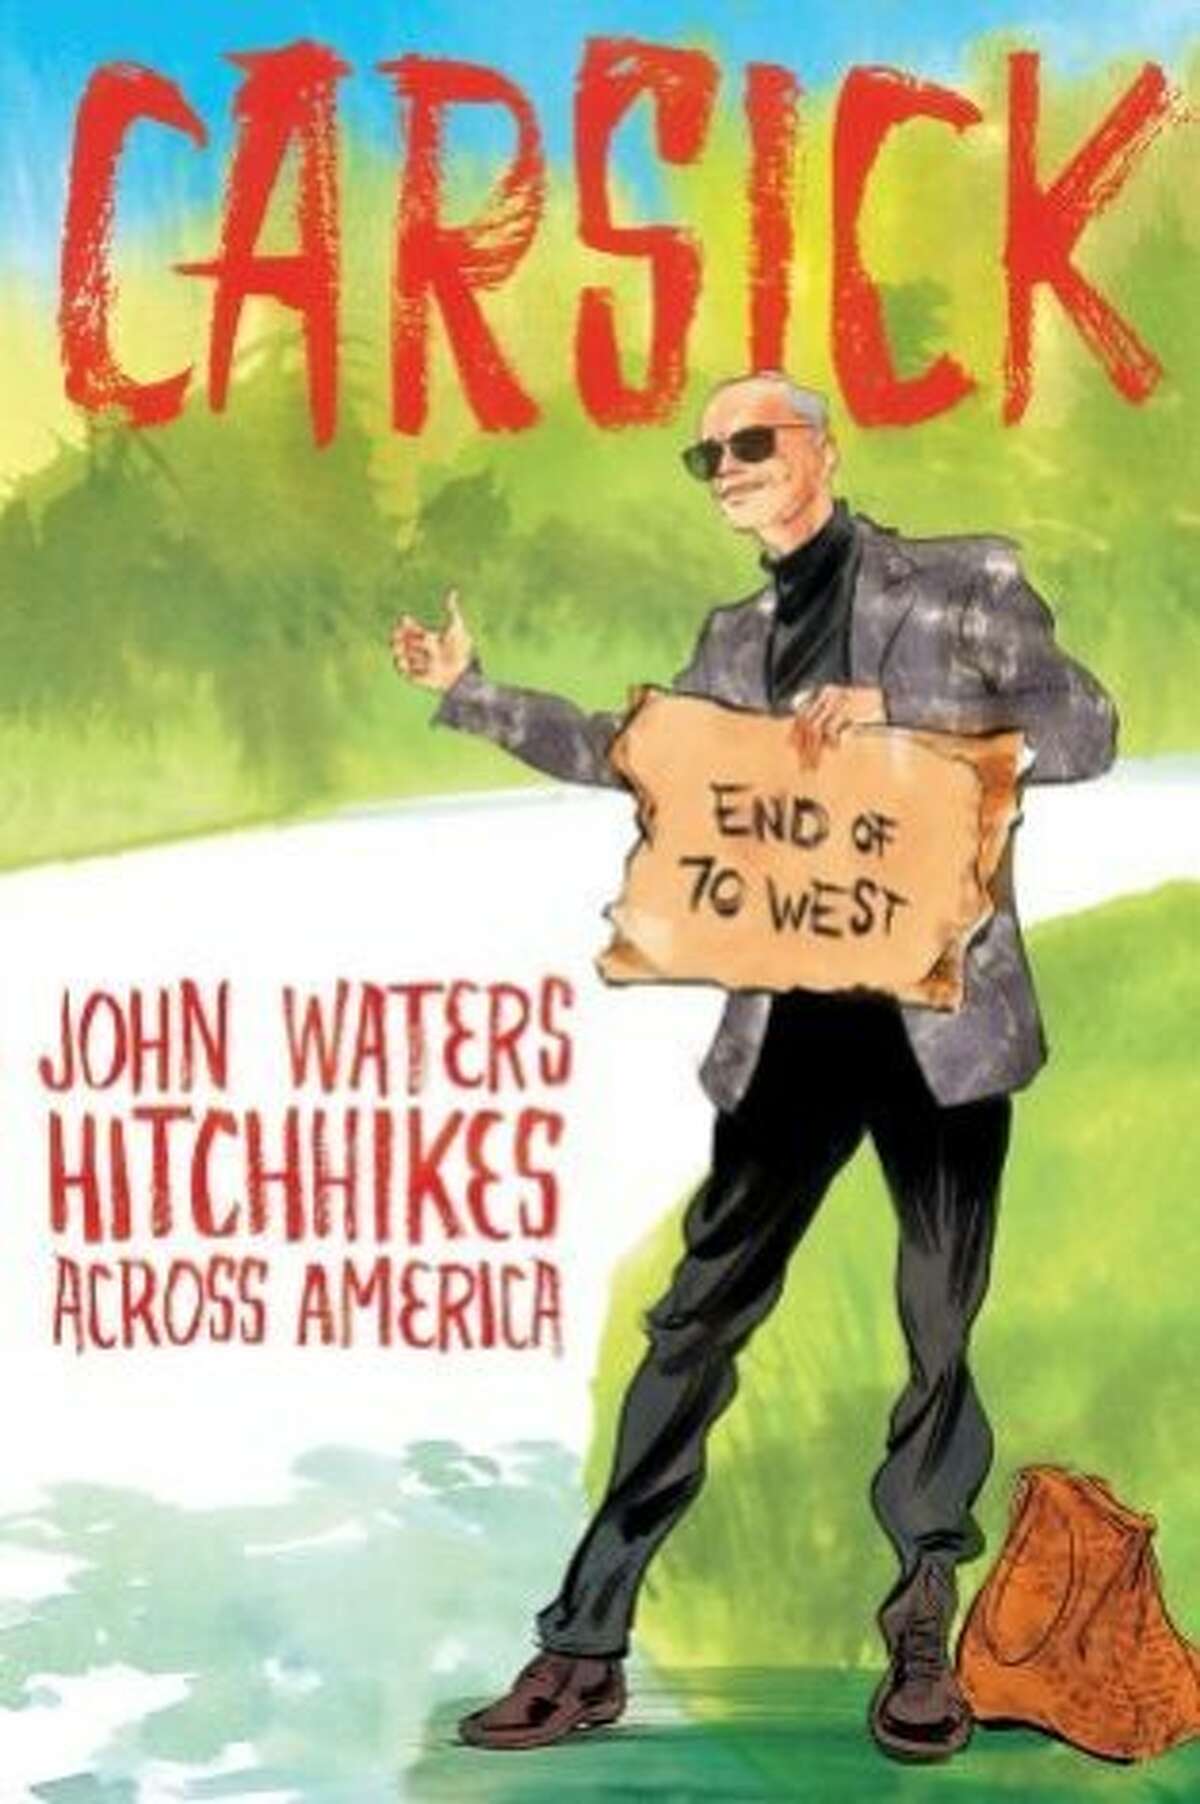 "Carsick" recounts John Waters' adventures hitchhiking from Baltimore to San Francisco.